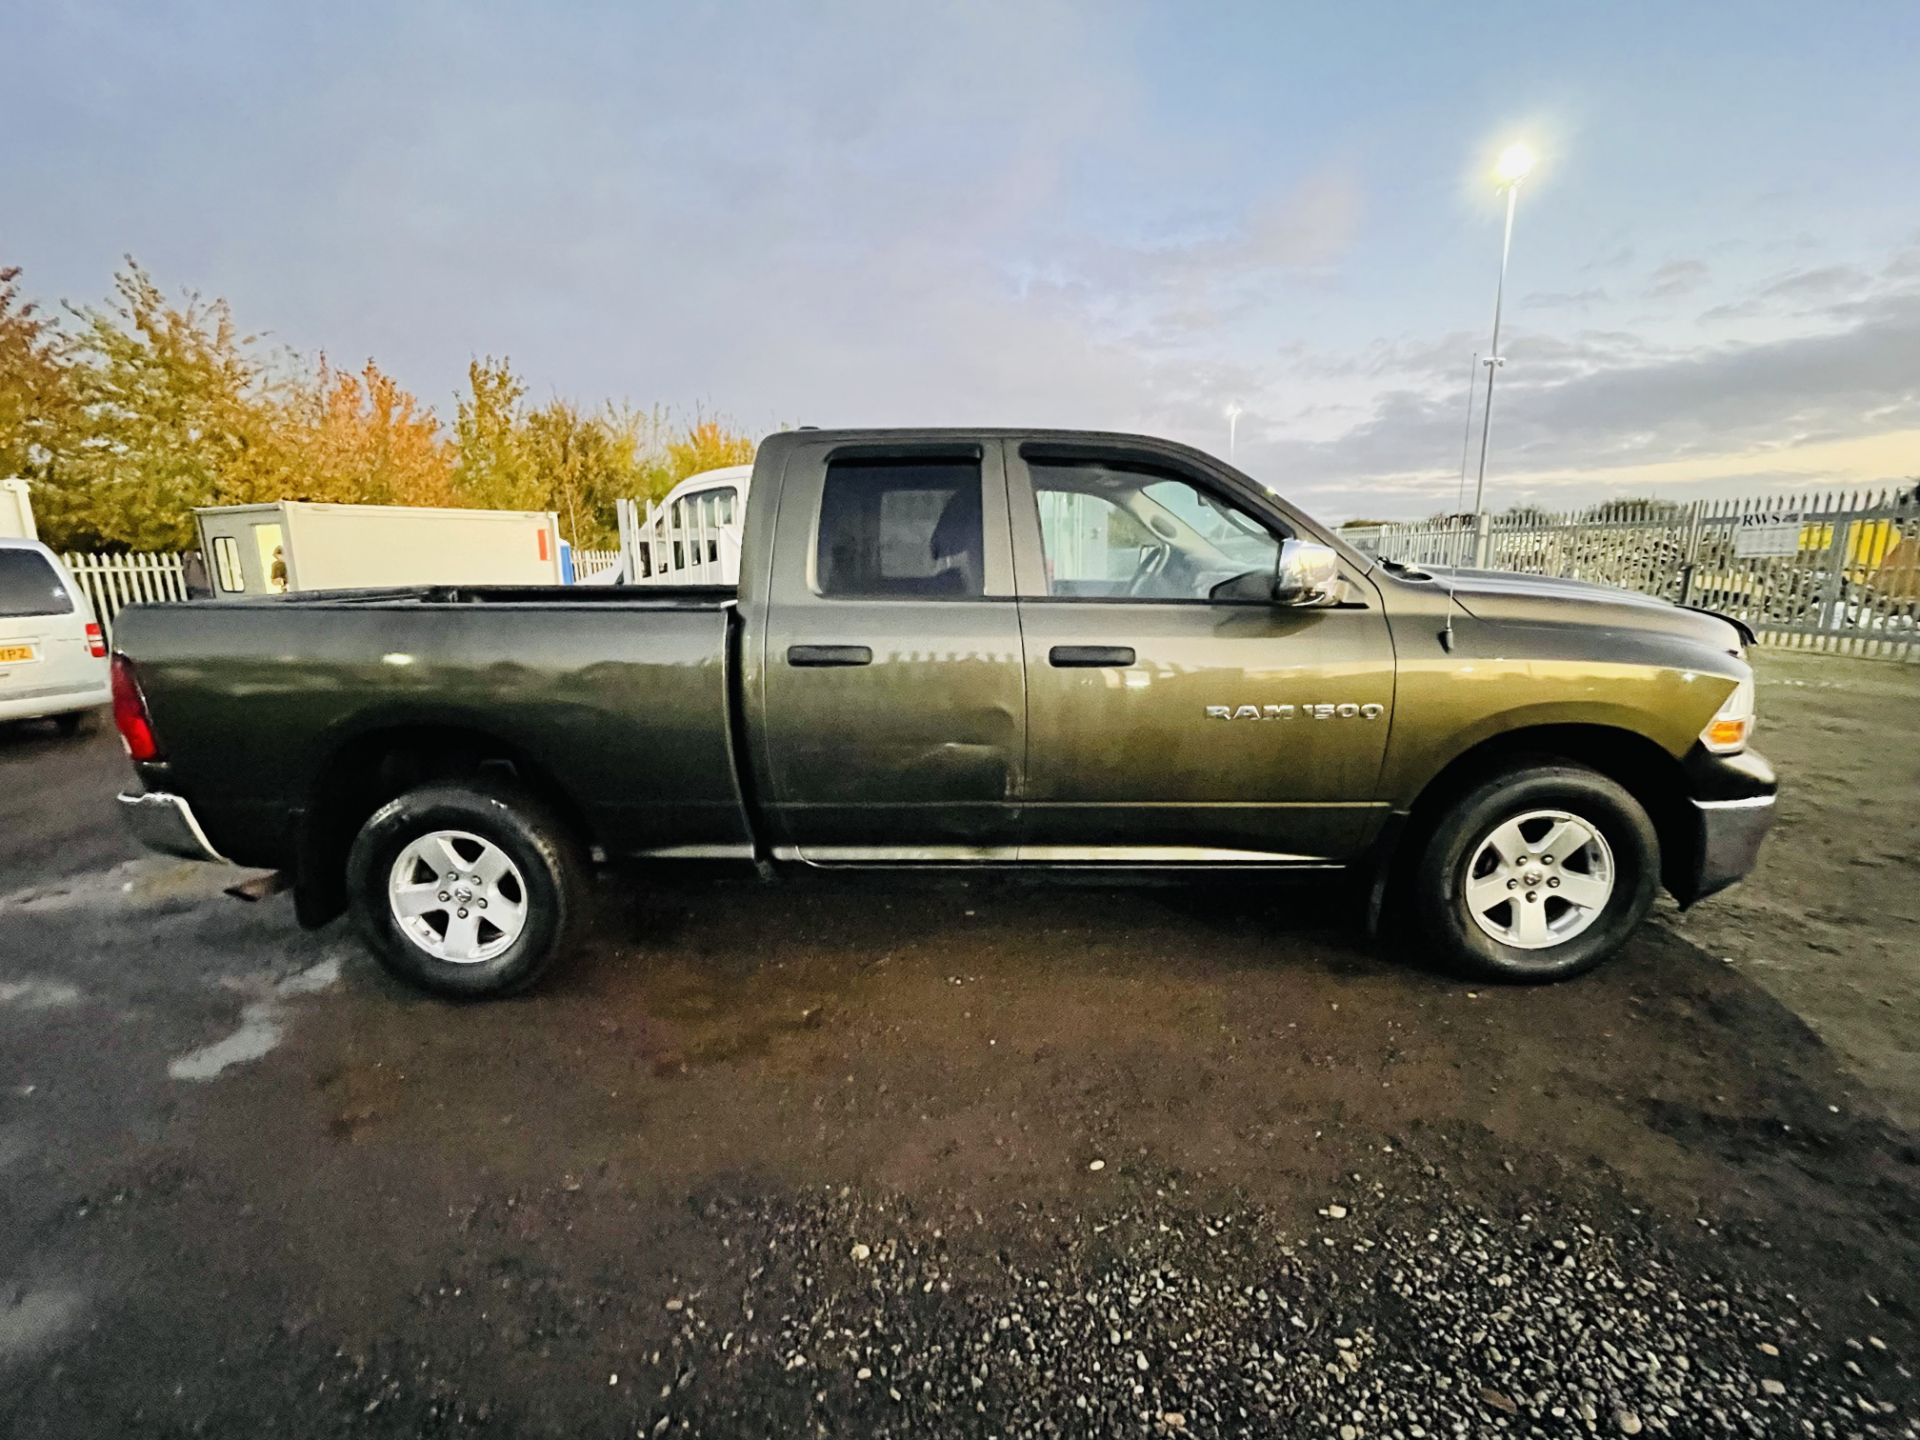 ** ON SALE **Dodge Ram 4.7 V8 1500 ST 4WD ' 2012 Year ' A/C - Cruise Control - 6 Seats Chrome Pack - Image 8 of 27